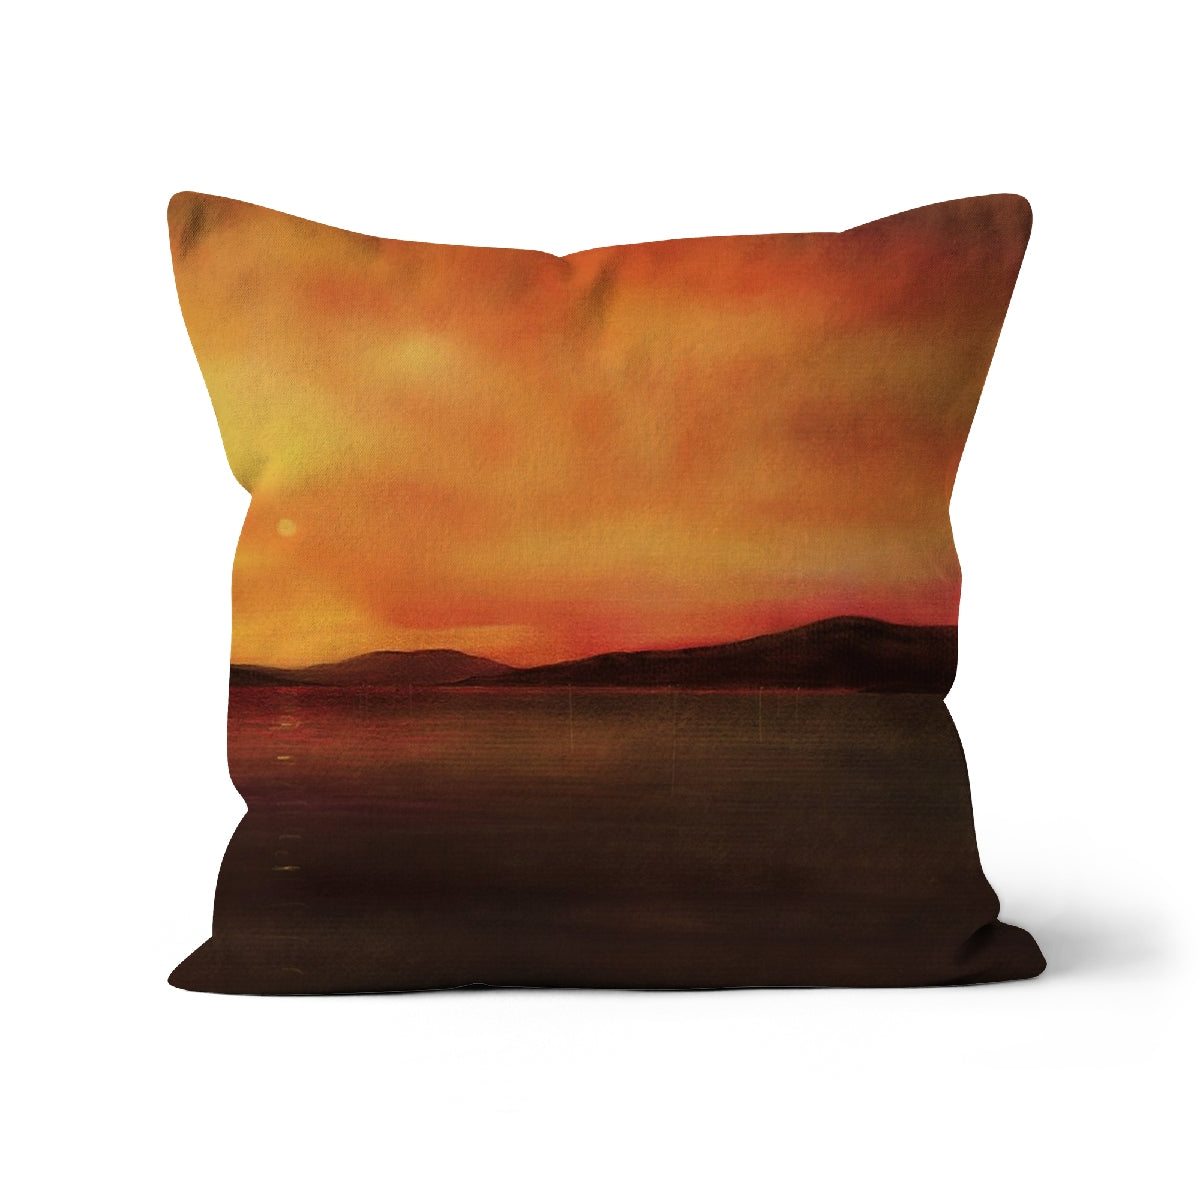 Harris Sunset Art Gifts Cushion-Cushions-Hebridean Islands Art Gallery-Canvas-24"x24"-Paintings, Prints, Homeware, Art Gifts From Scotland By Scottish Artist Kevin Hunter